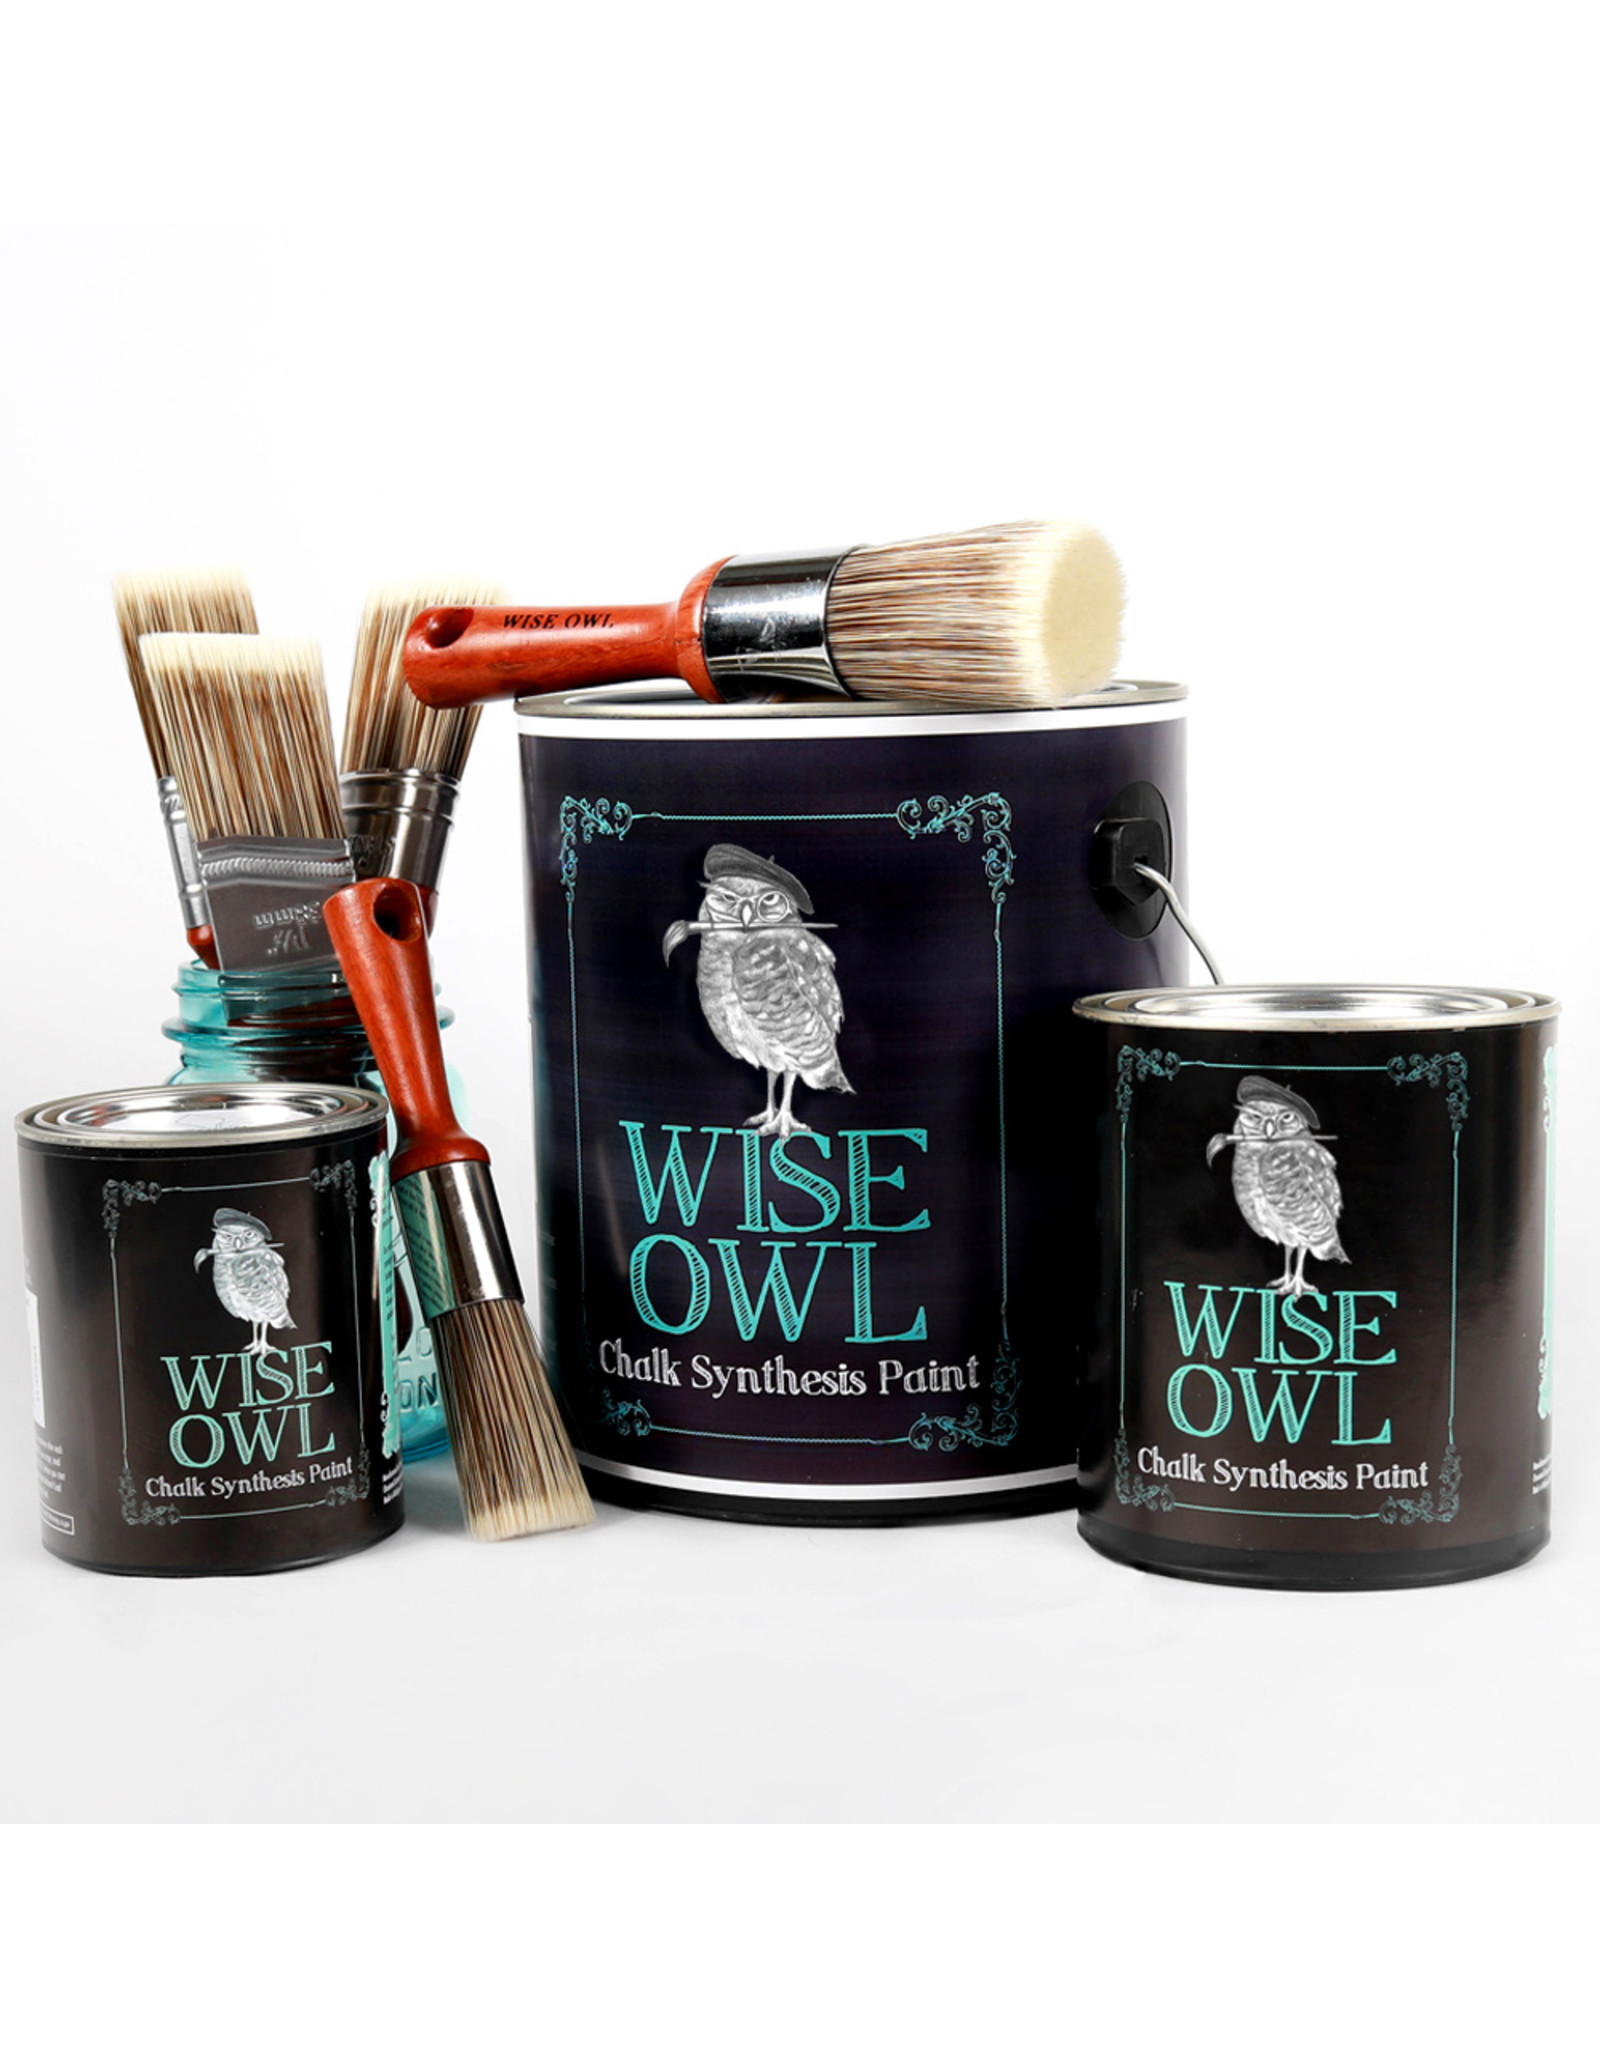 Wise Owl Paint Chalk Synthesis Paint Higgins Lake-Pint